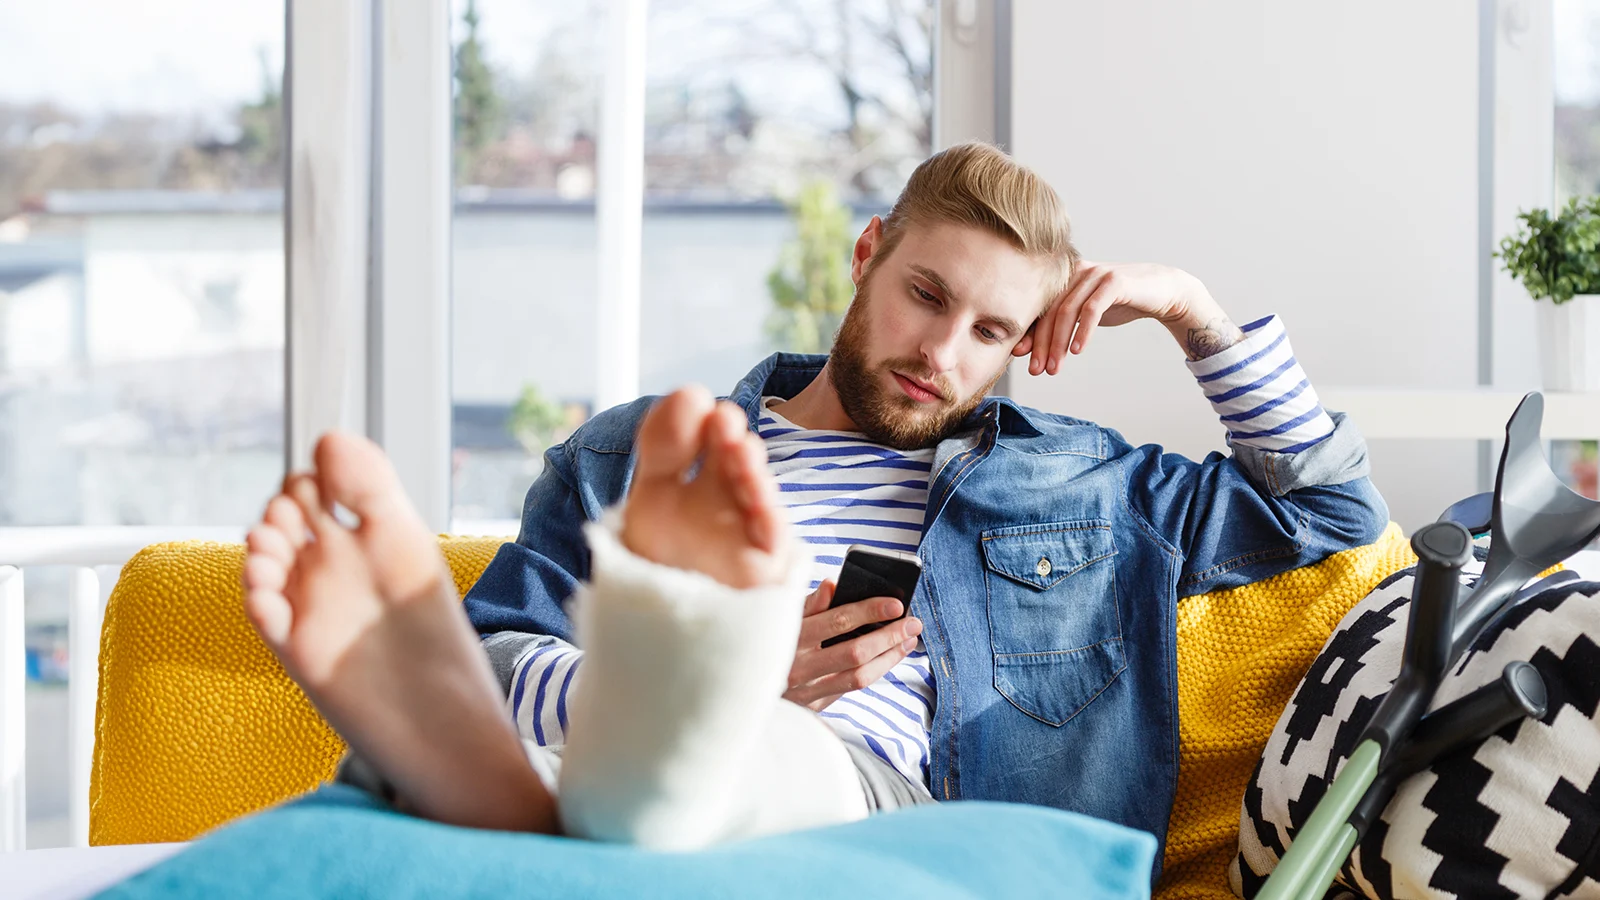 Disability insurance: definitions and terms you should know - Man with a cast on his broken foot looking at his phone